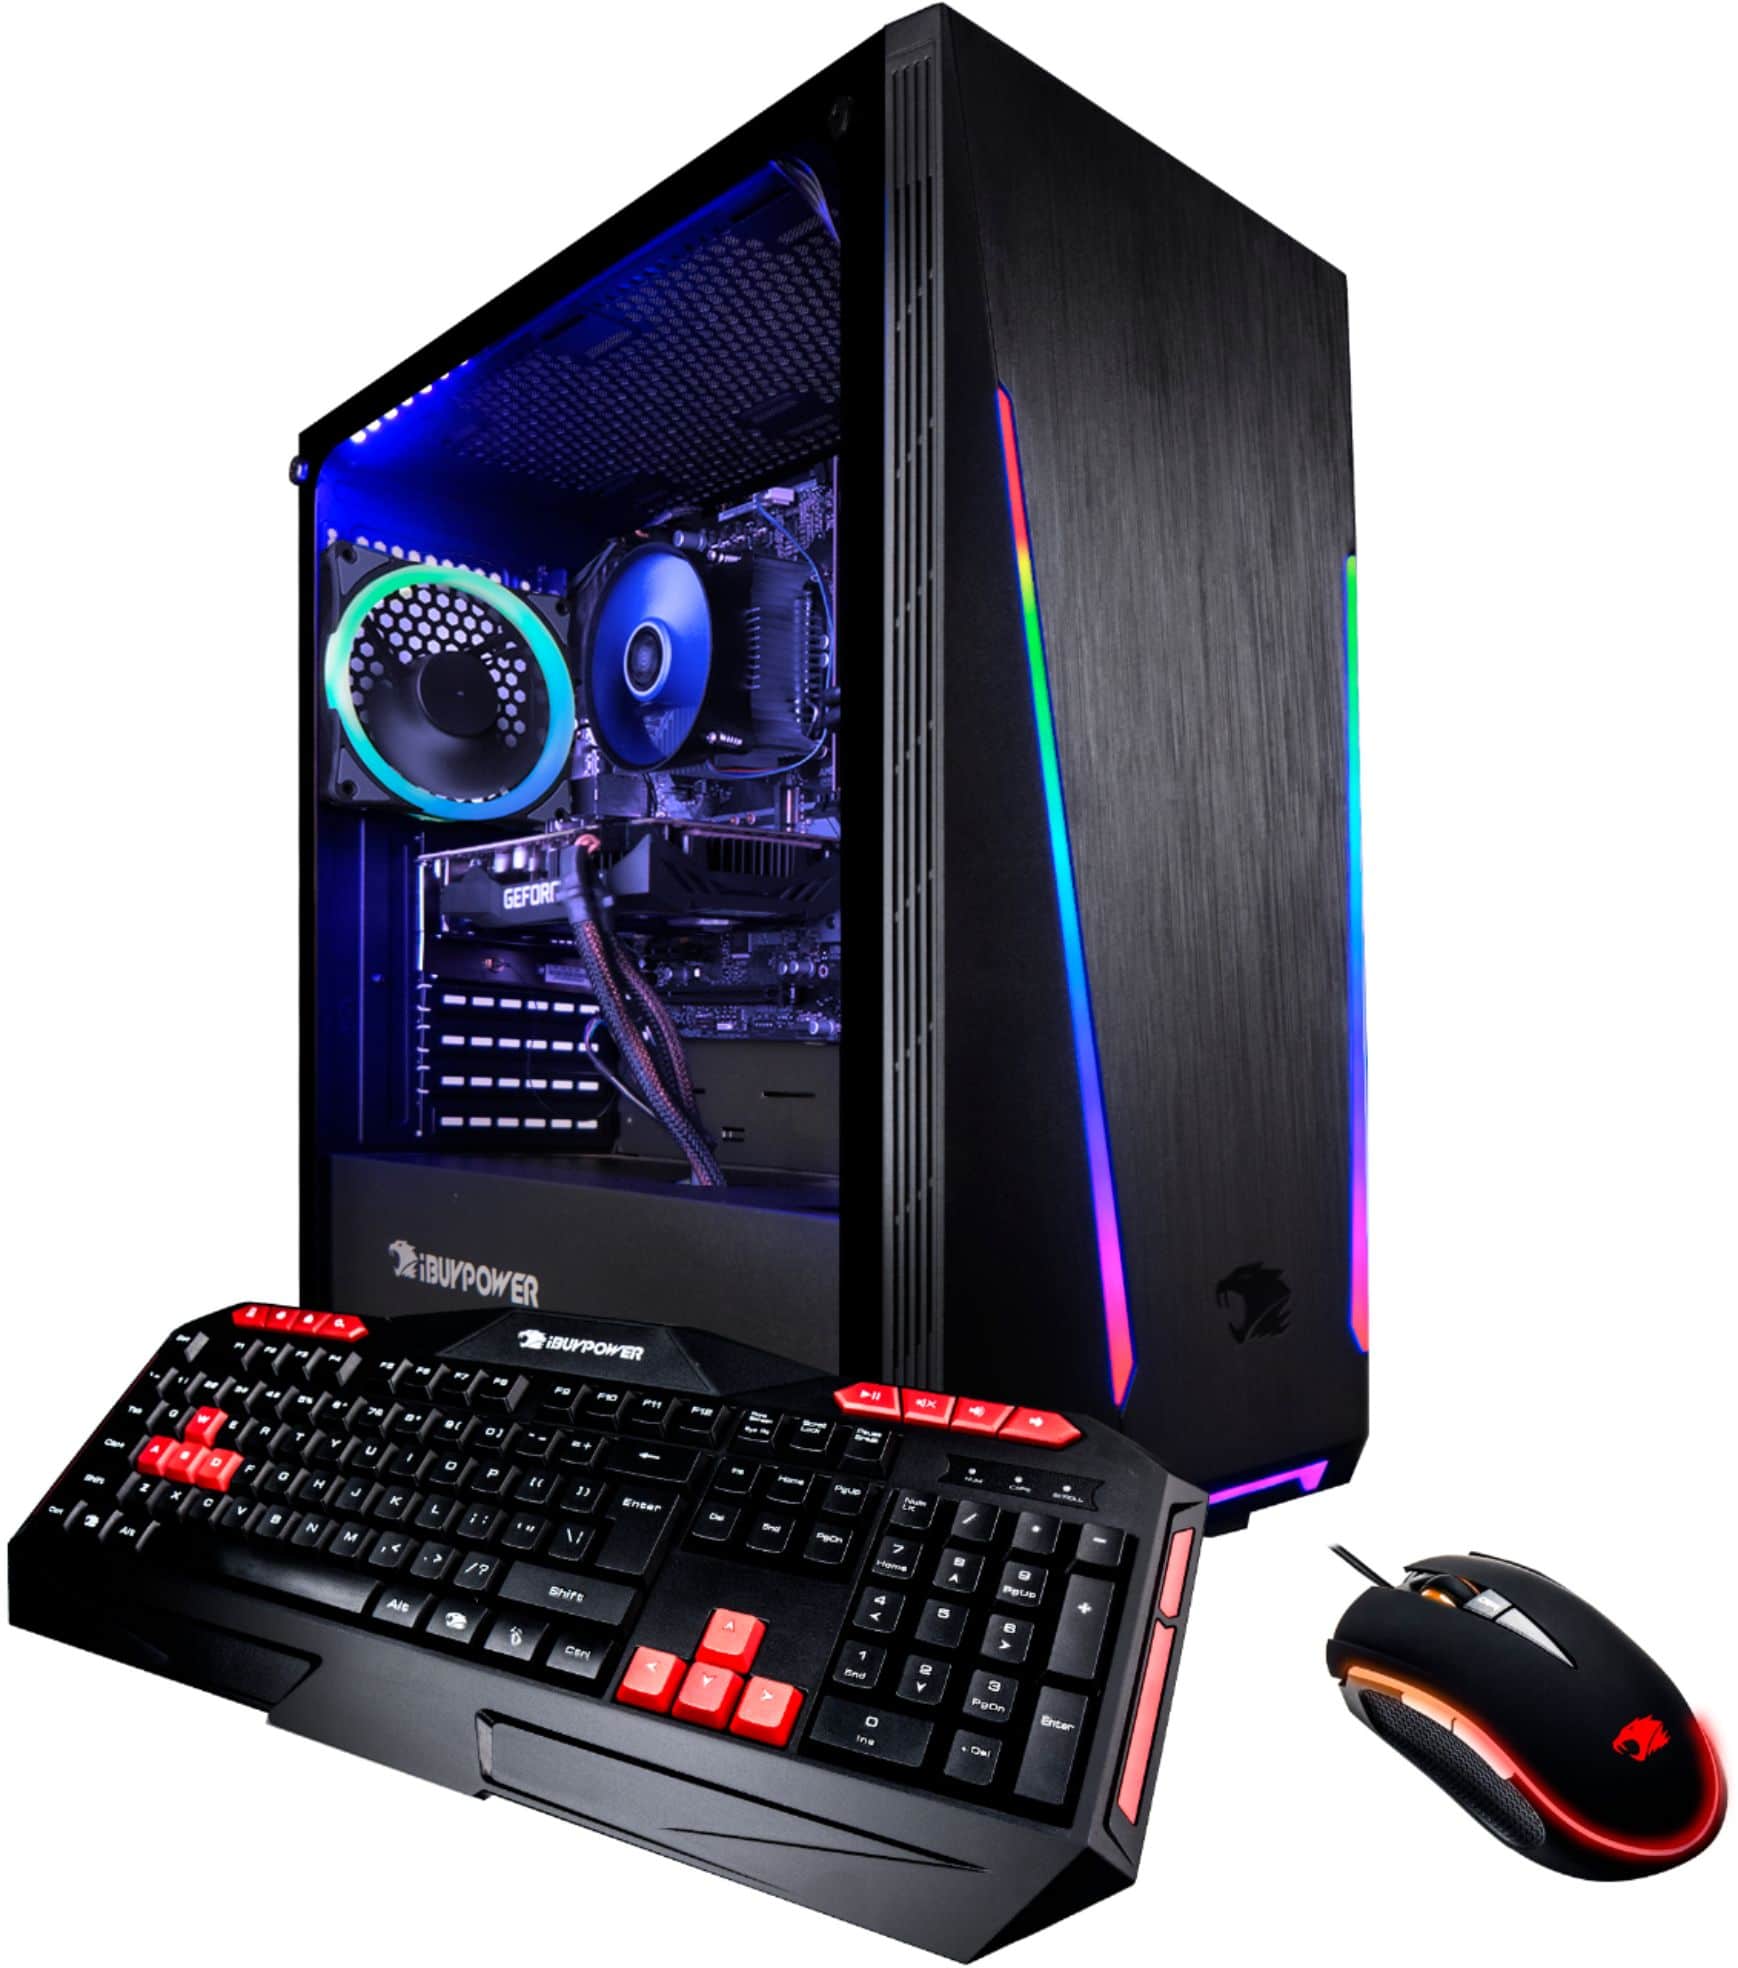 Harga PC All In One Core i5